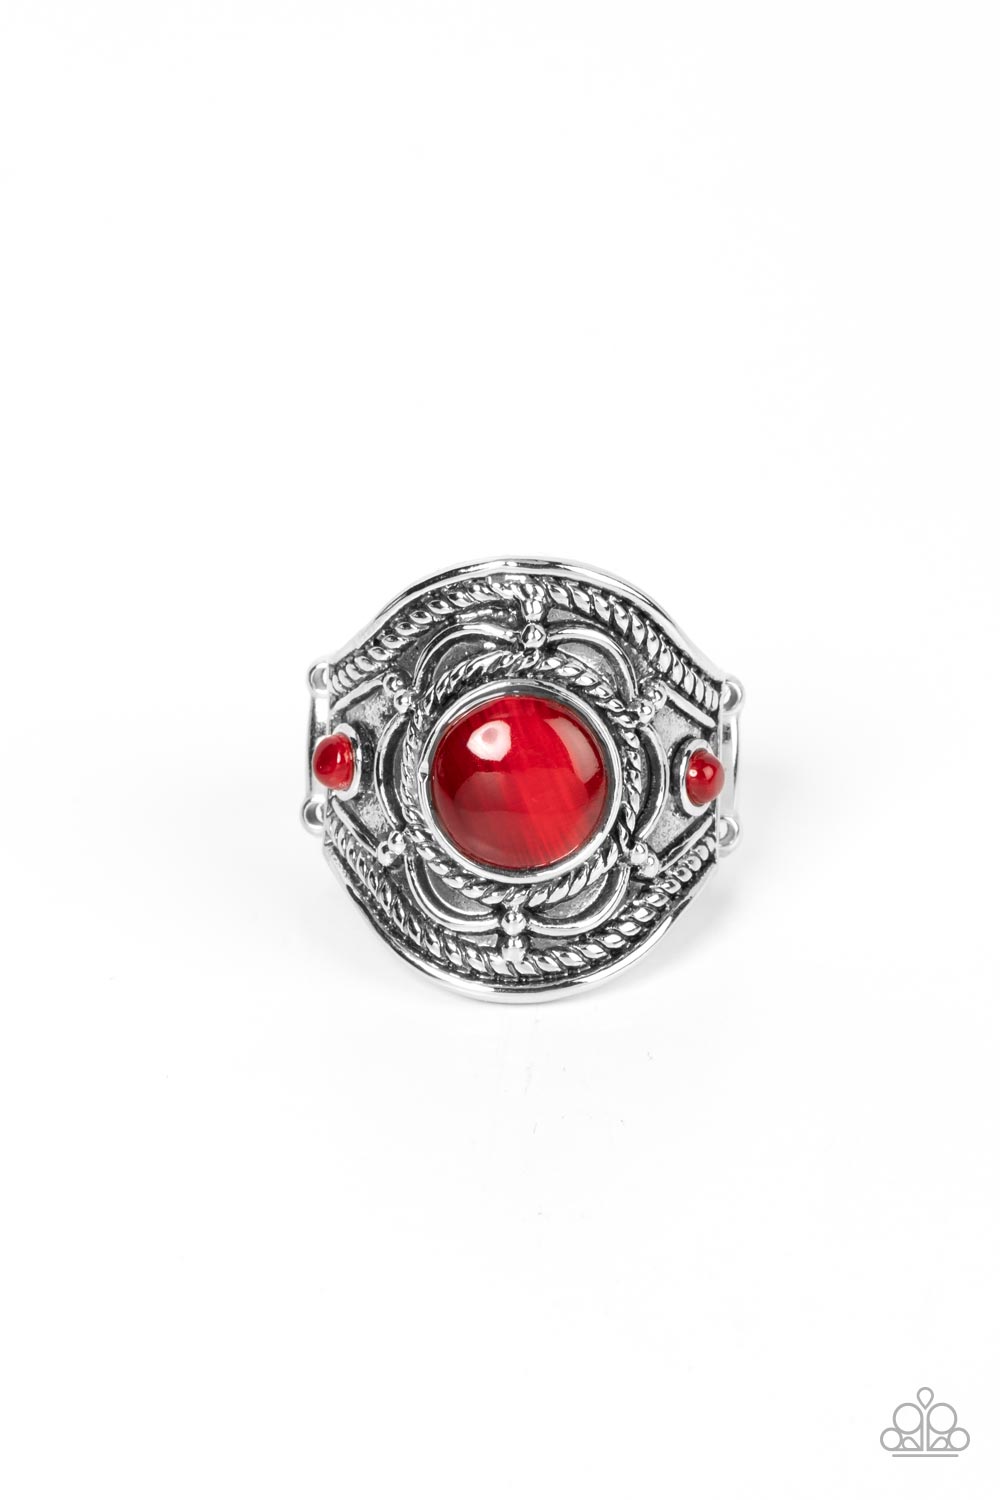 Exuberant Escapade Red Cat's Eye Ring - Paparazzi Accessories- lightbox - CarasShop.com - $5 Jewelry by Cara Jewels